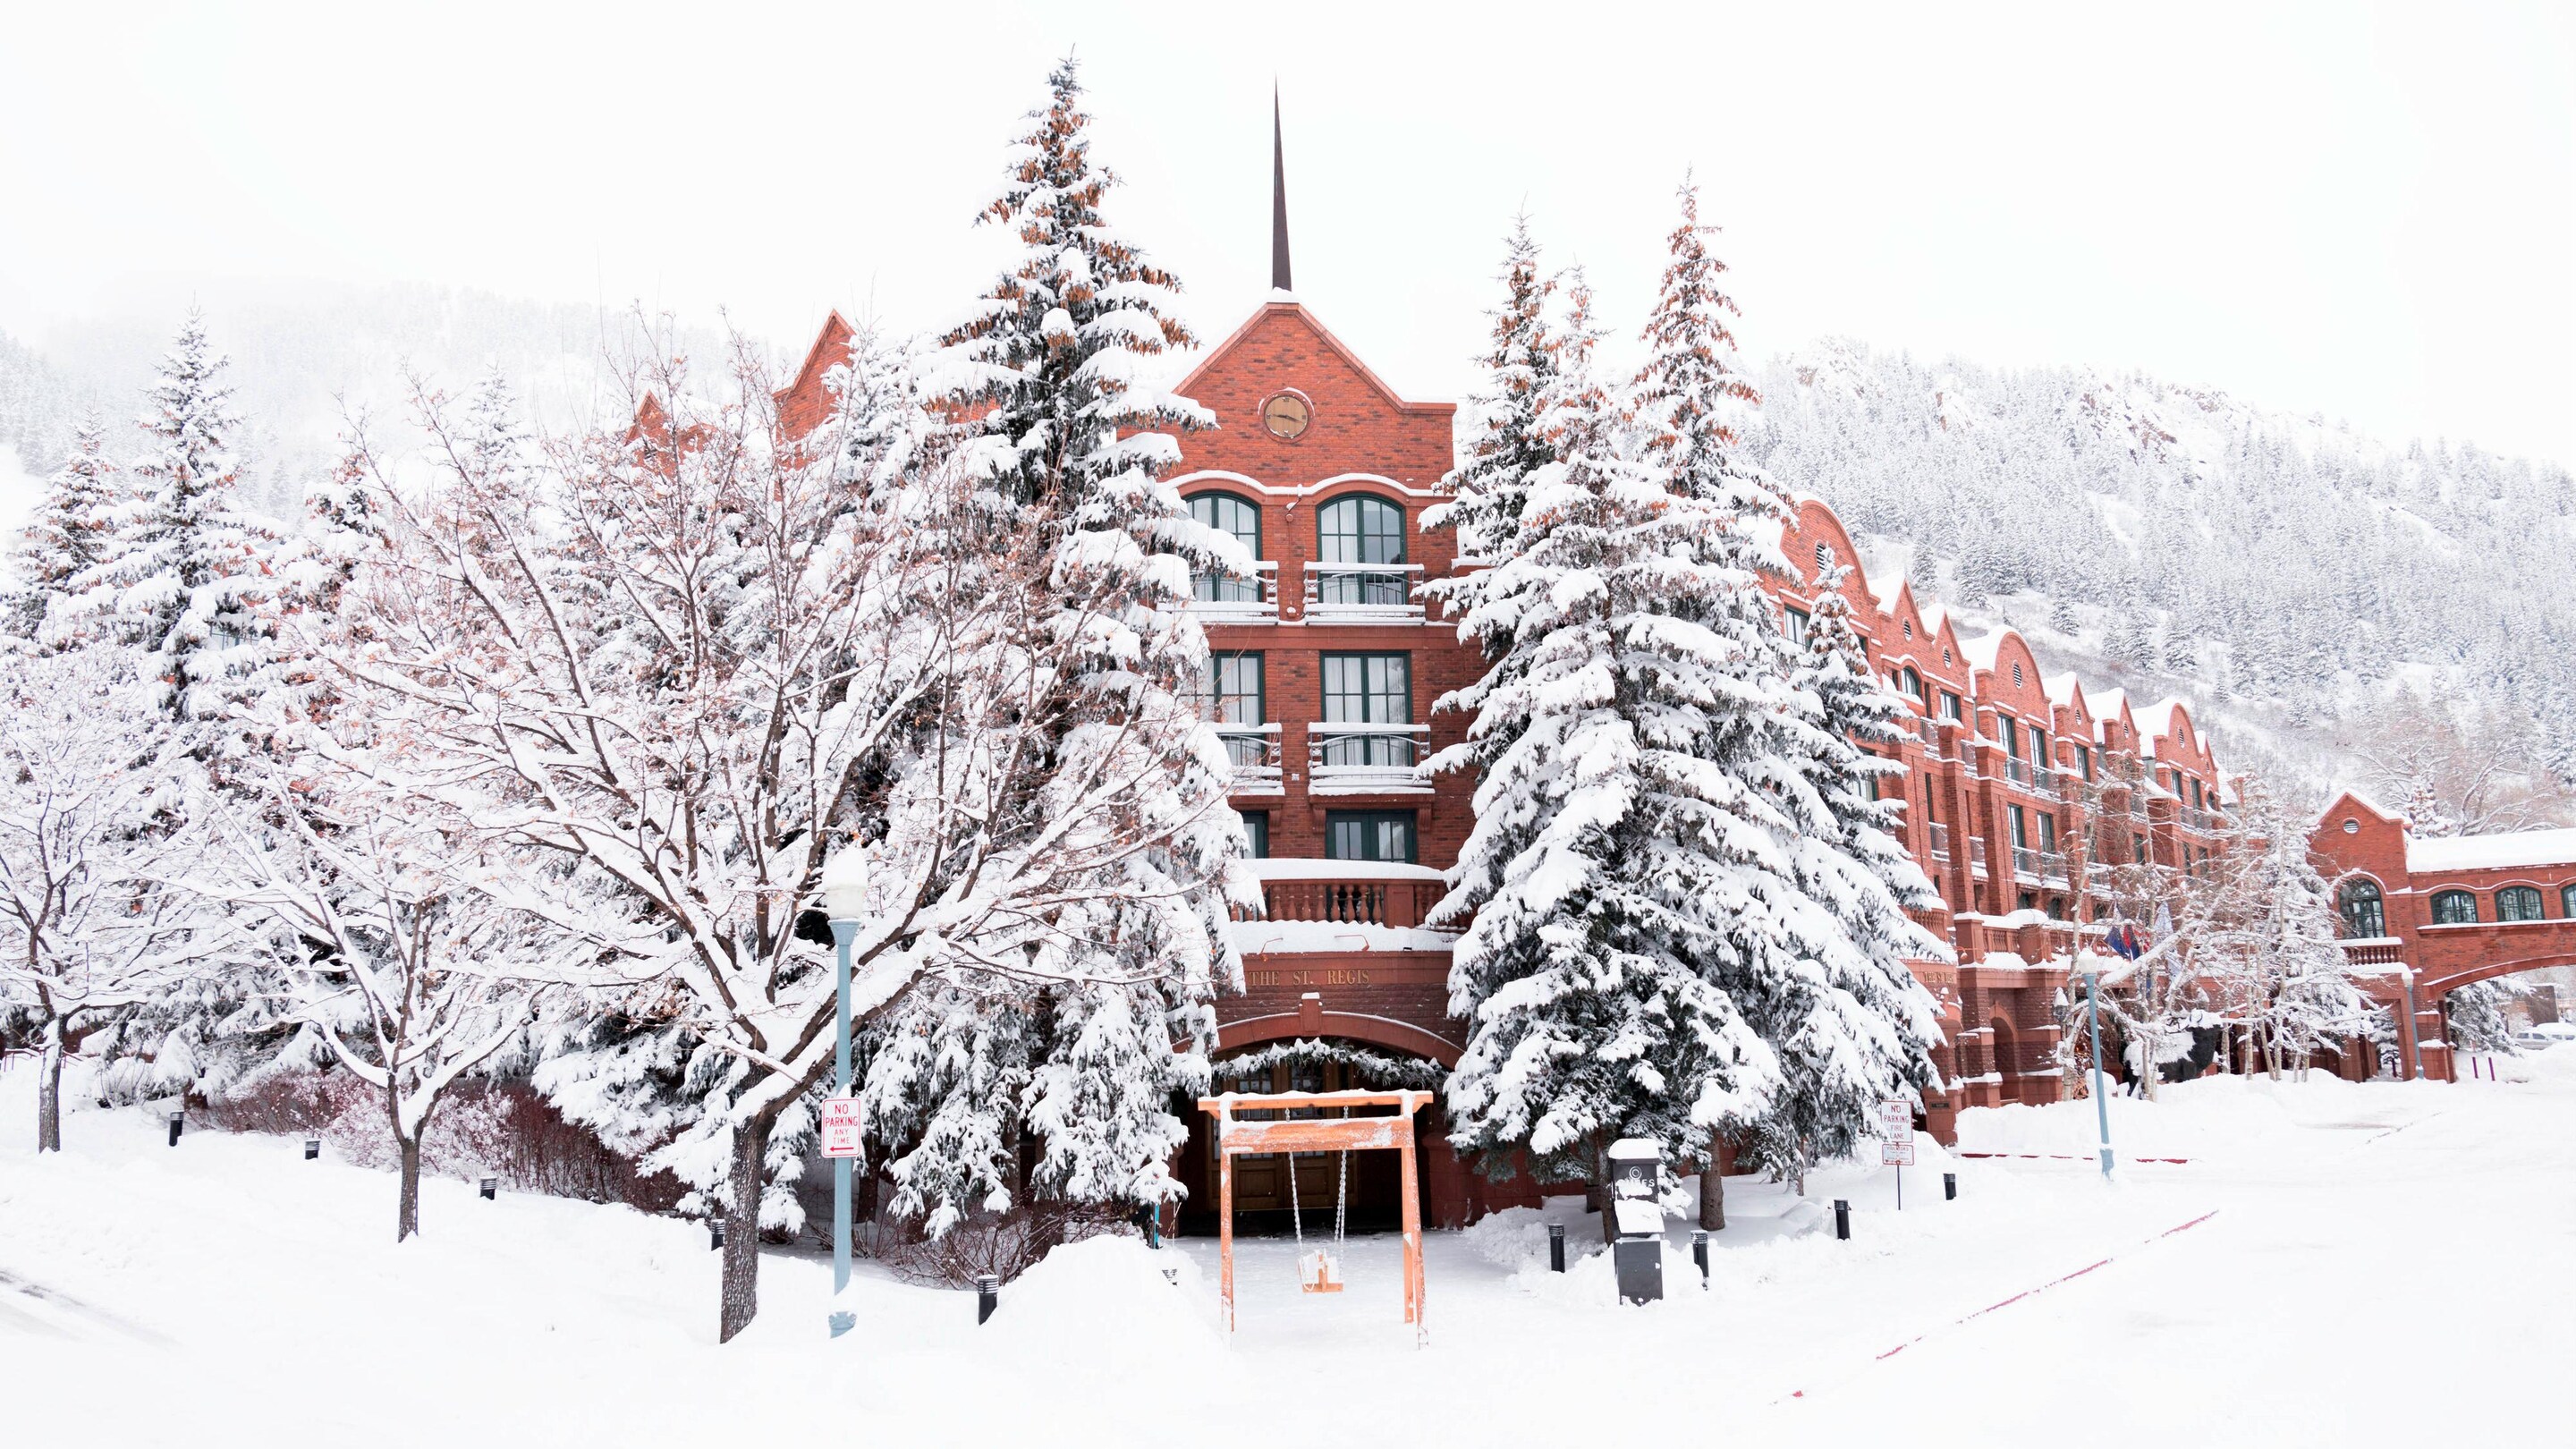 Hotel exterior surrounded by trees covered in snow